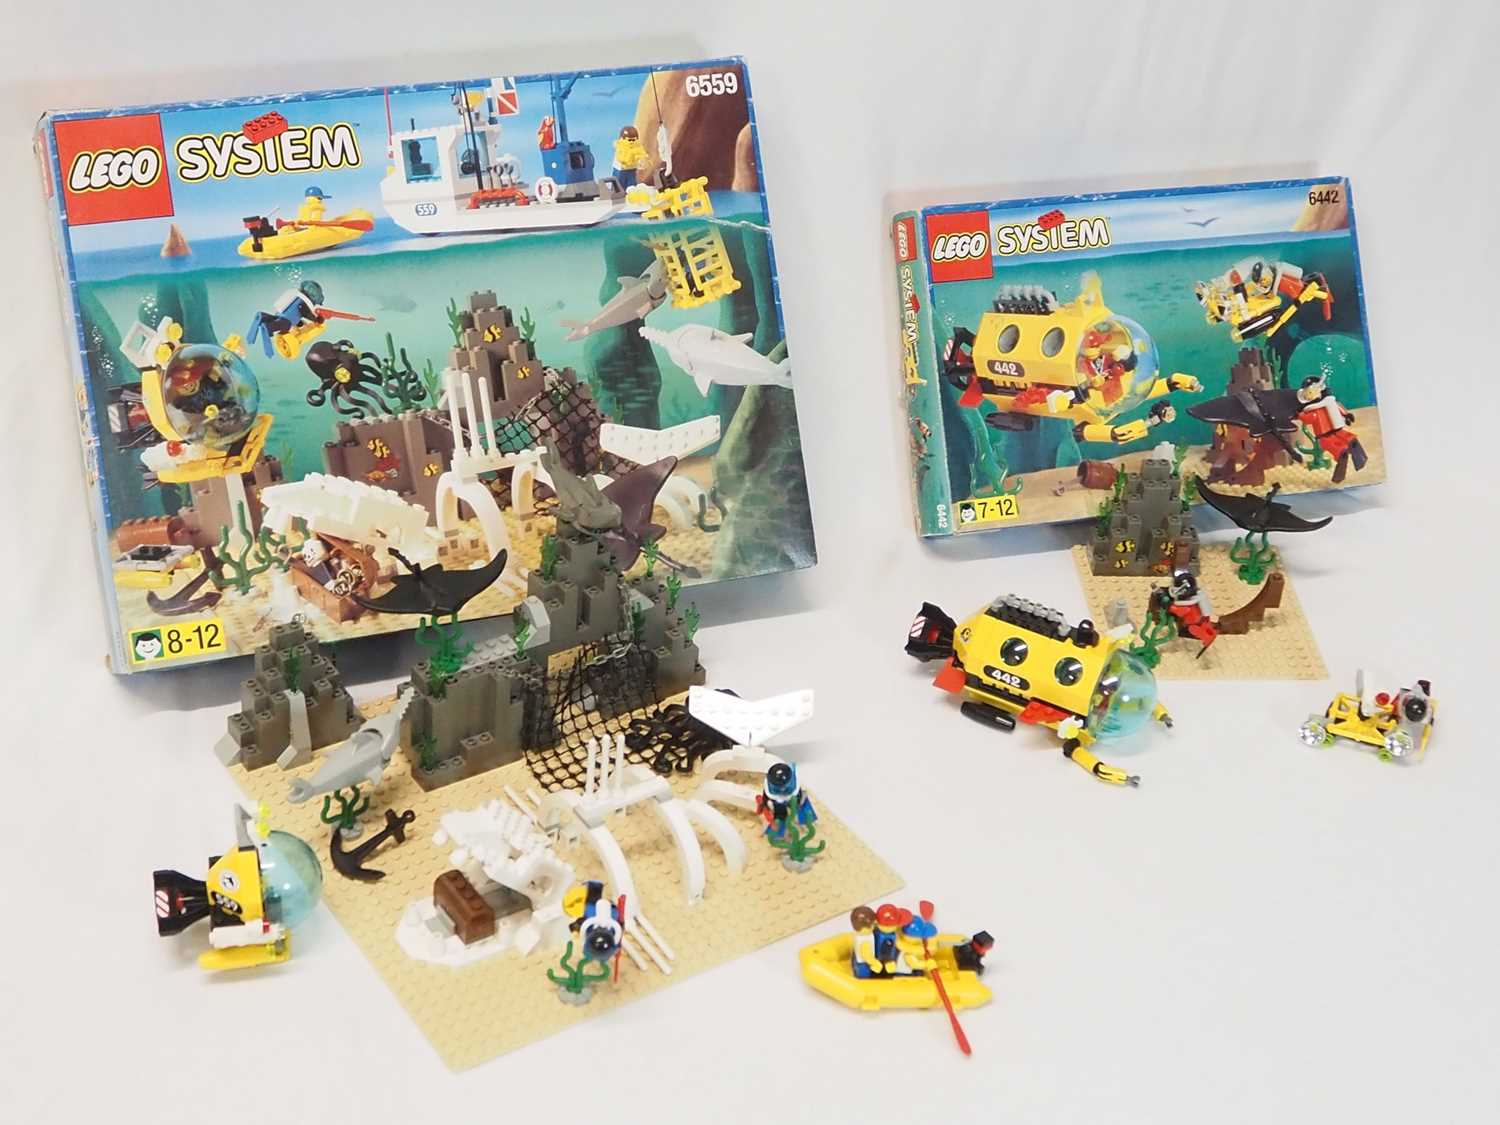 LEGO - TOWN - A pair of Divers sets comprising #6442 Stingray Explorer (complete with printed